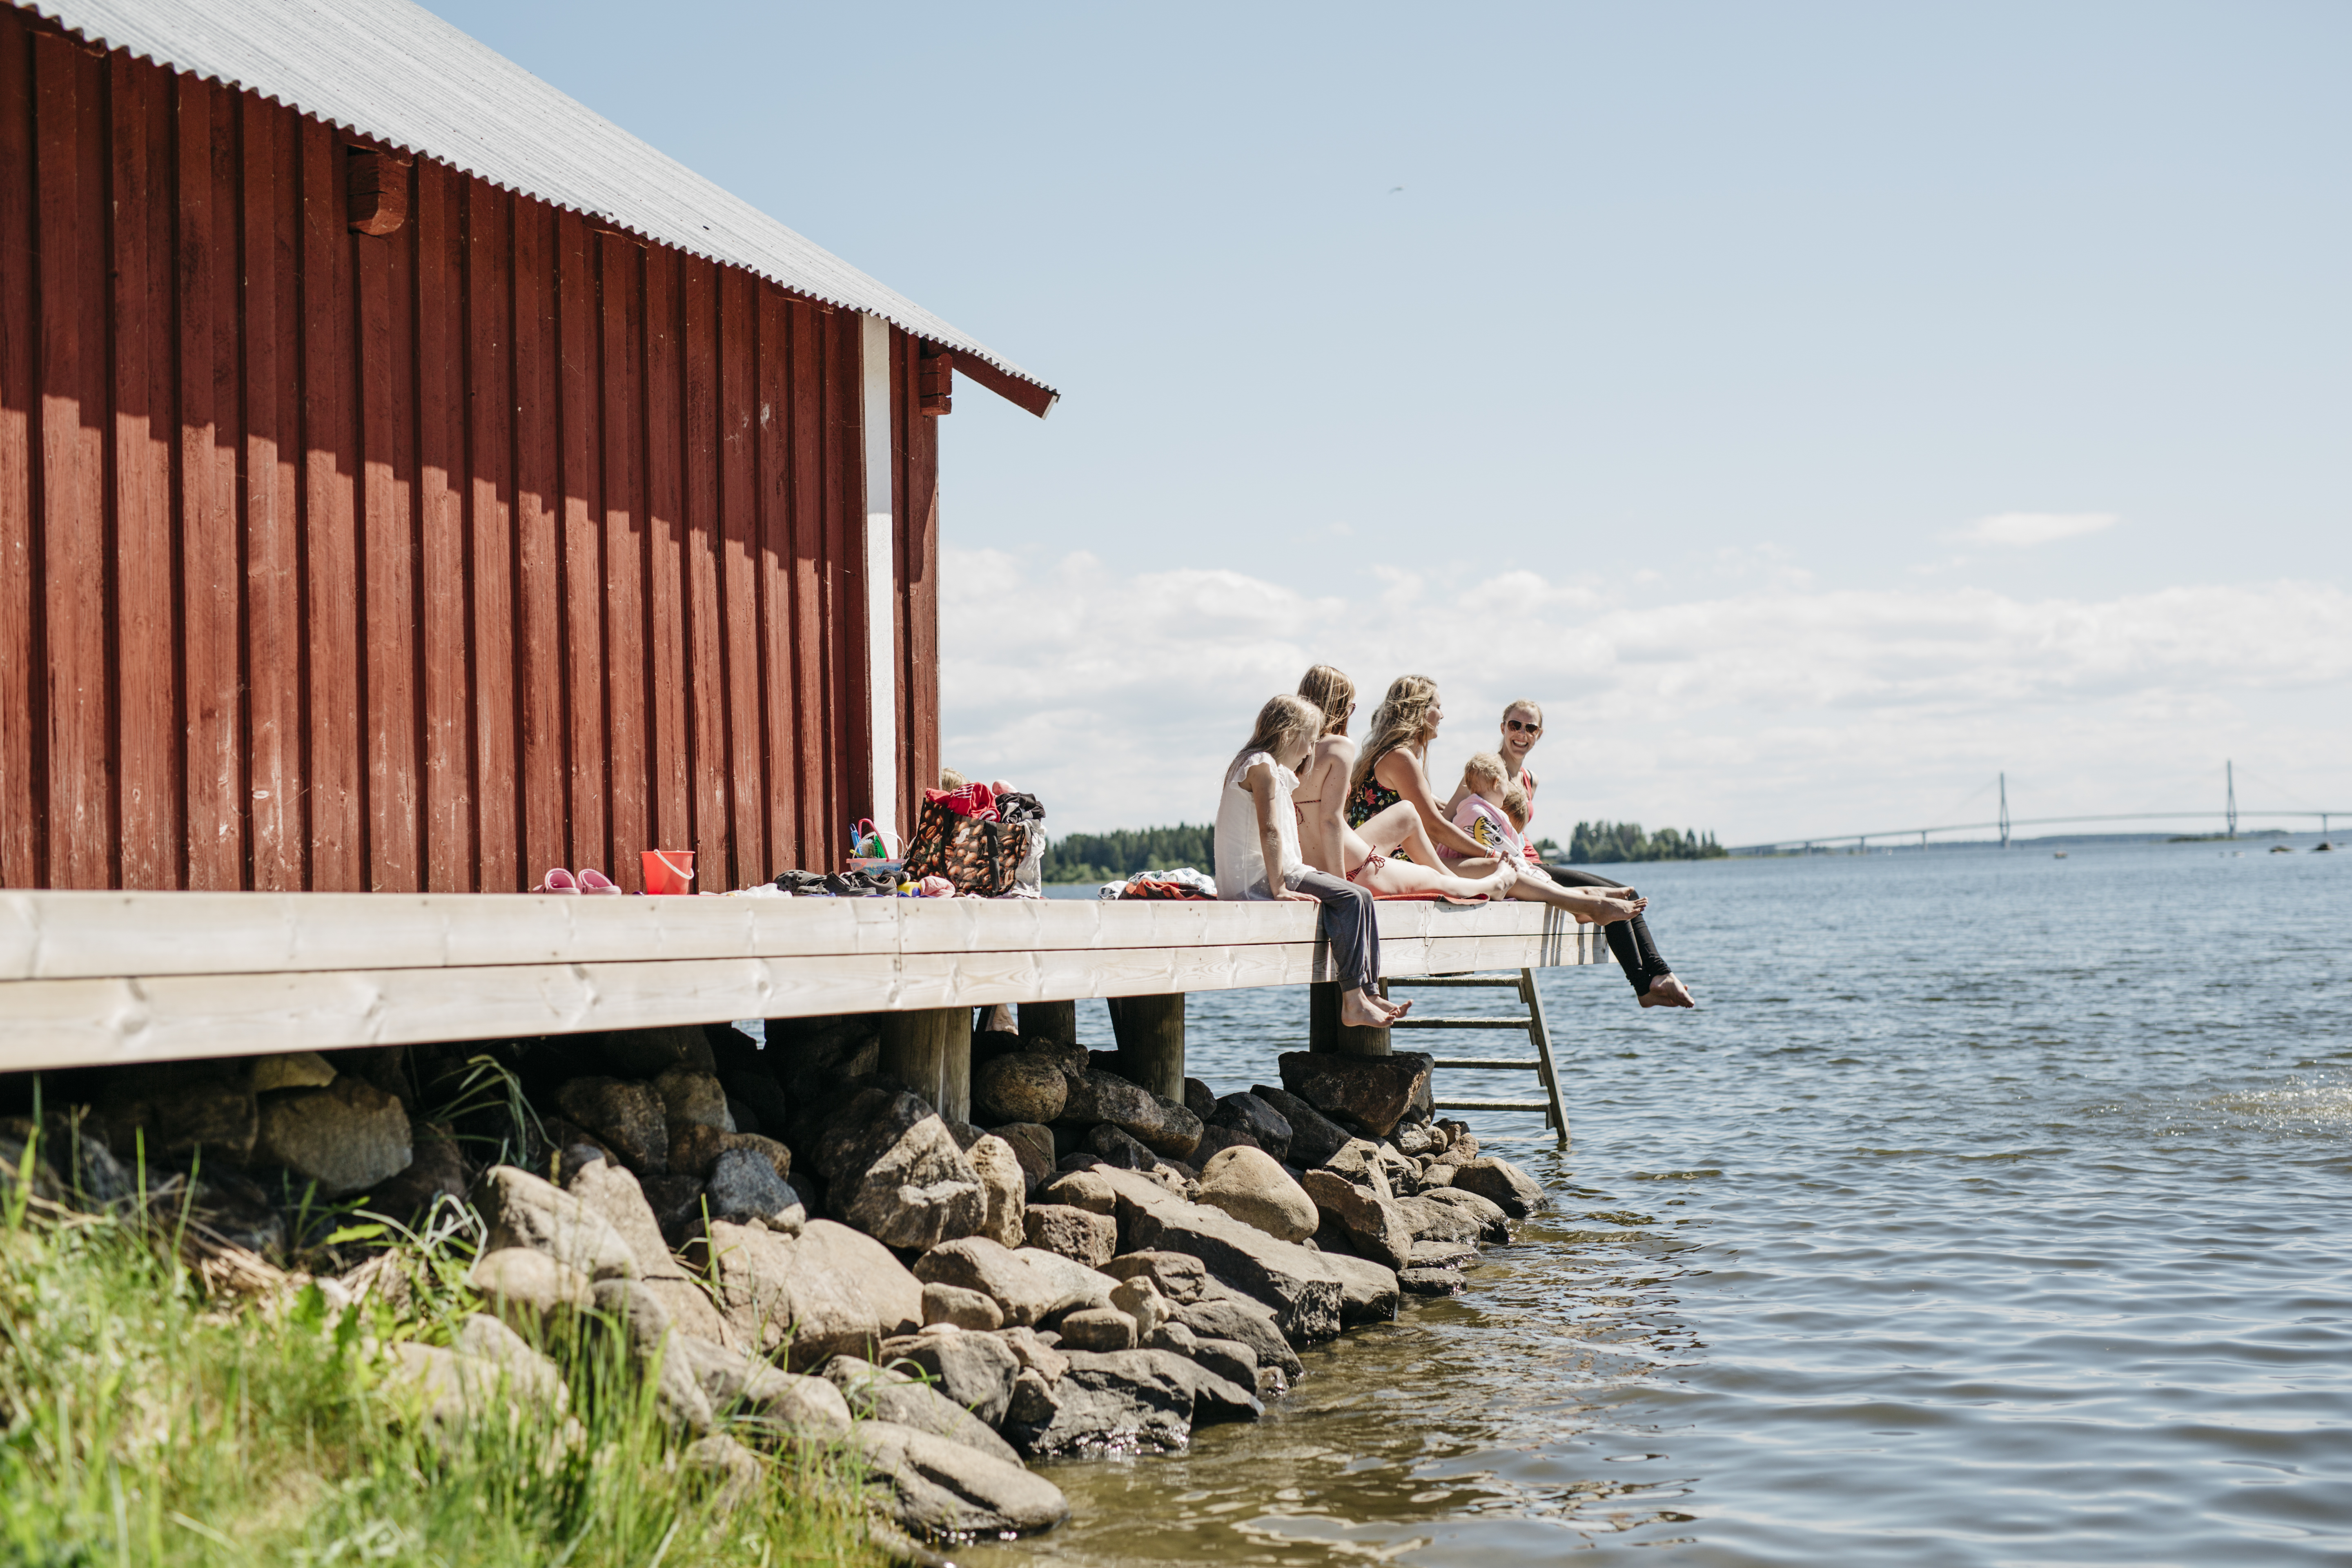 a family enjoying their time in a pier at the Finnish archipelago